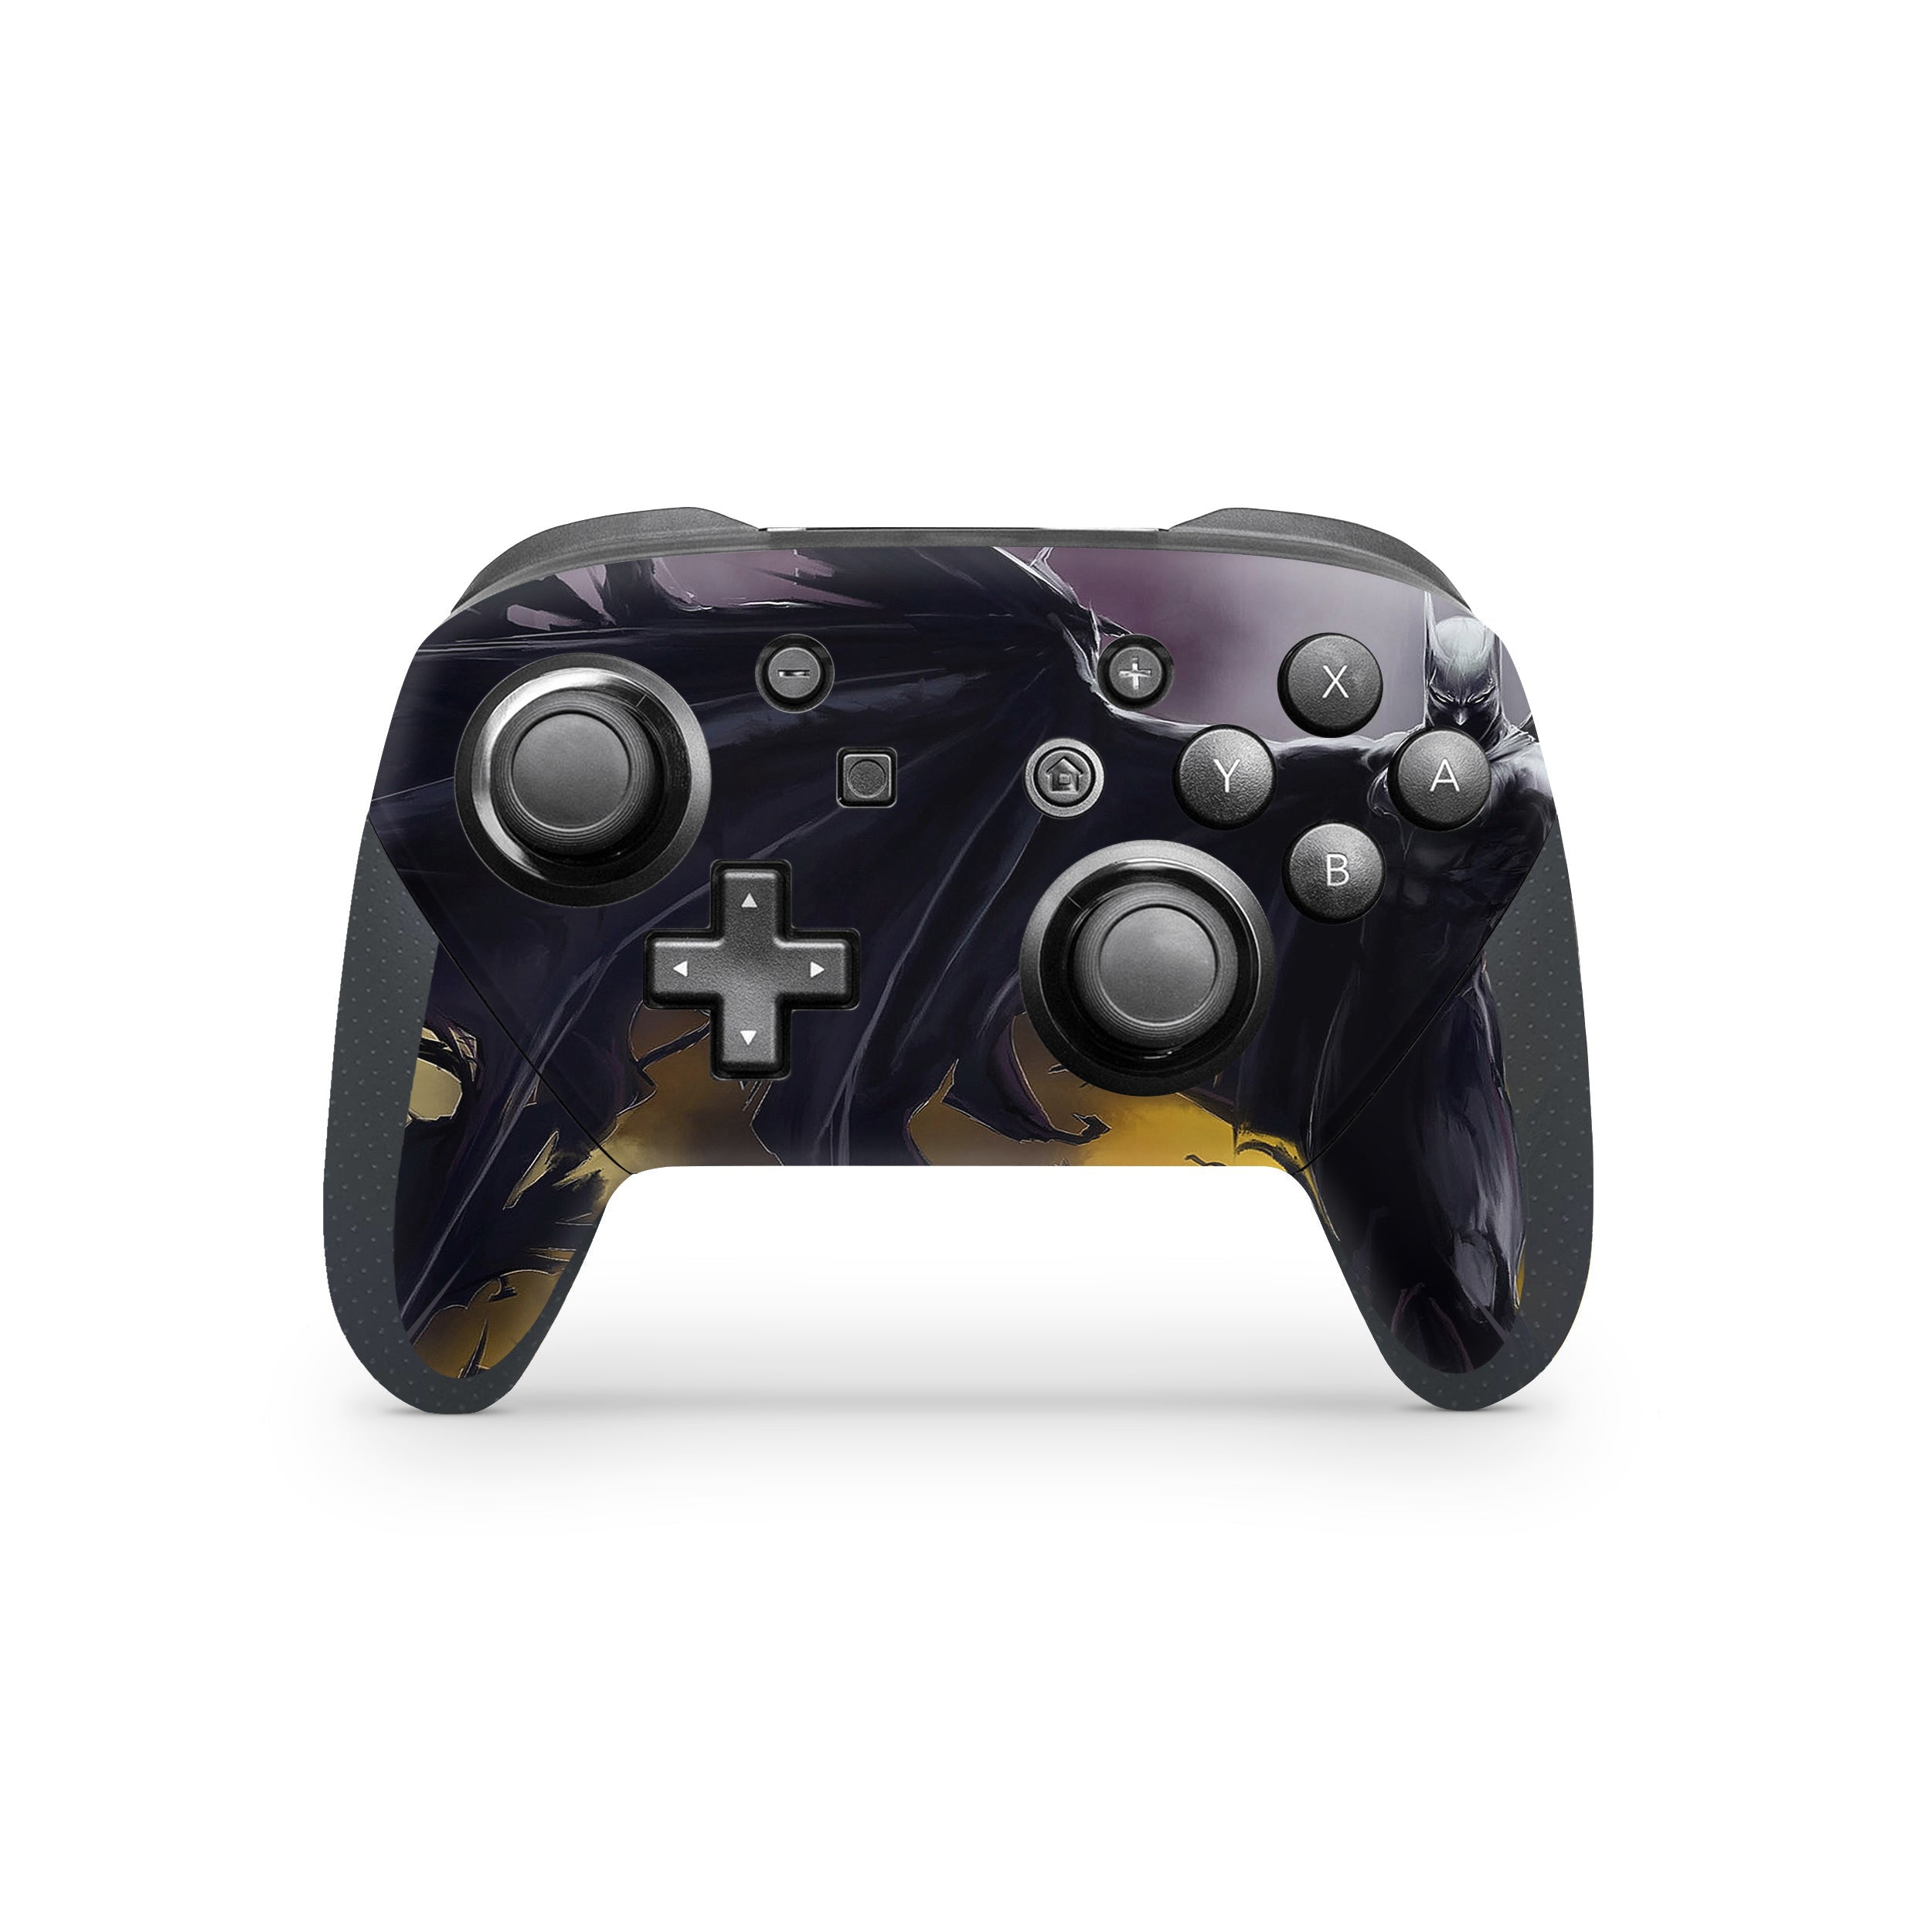 A video game skin featuring a DC Batman design for the Switch Pro Controller.